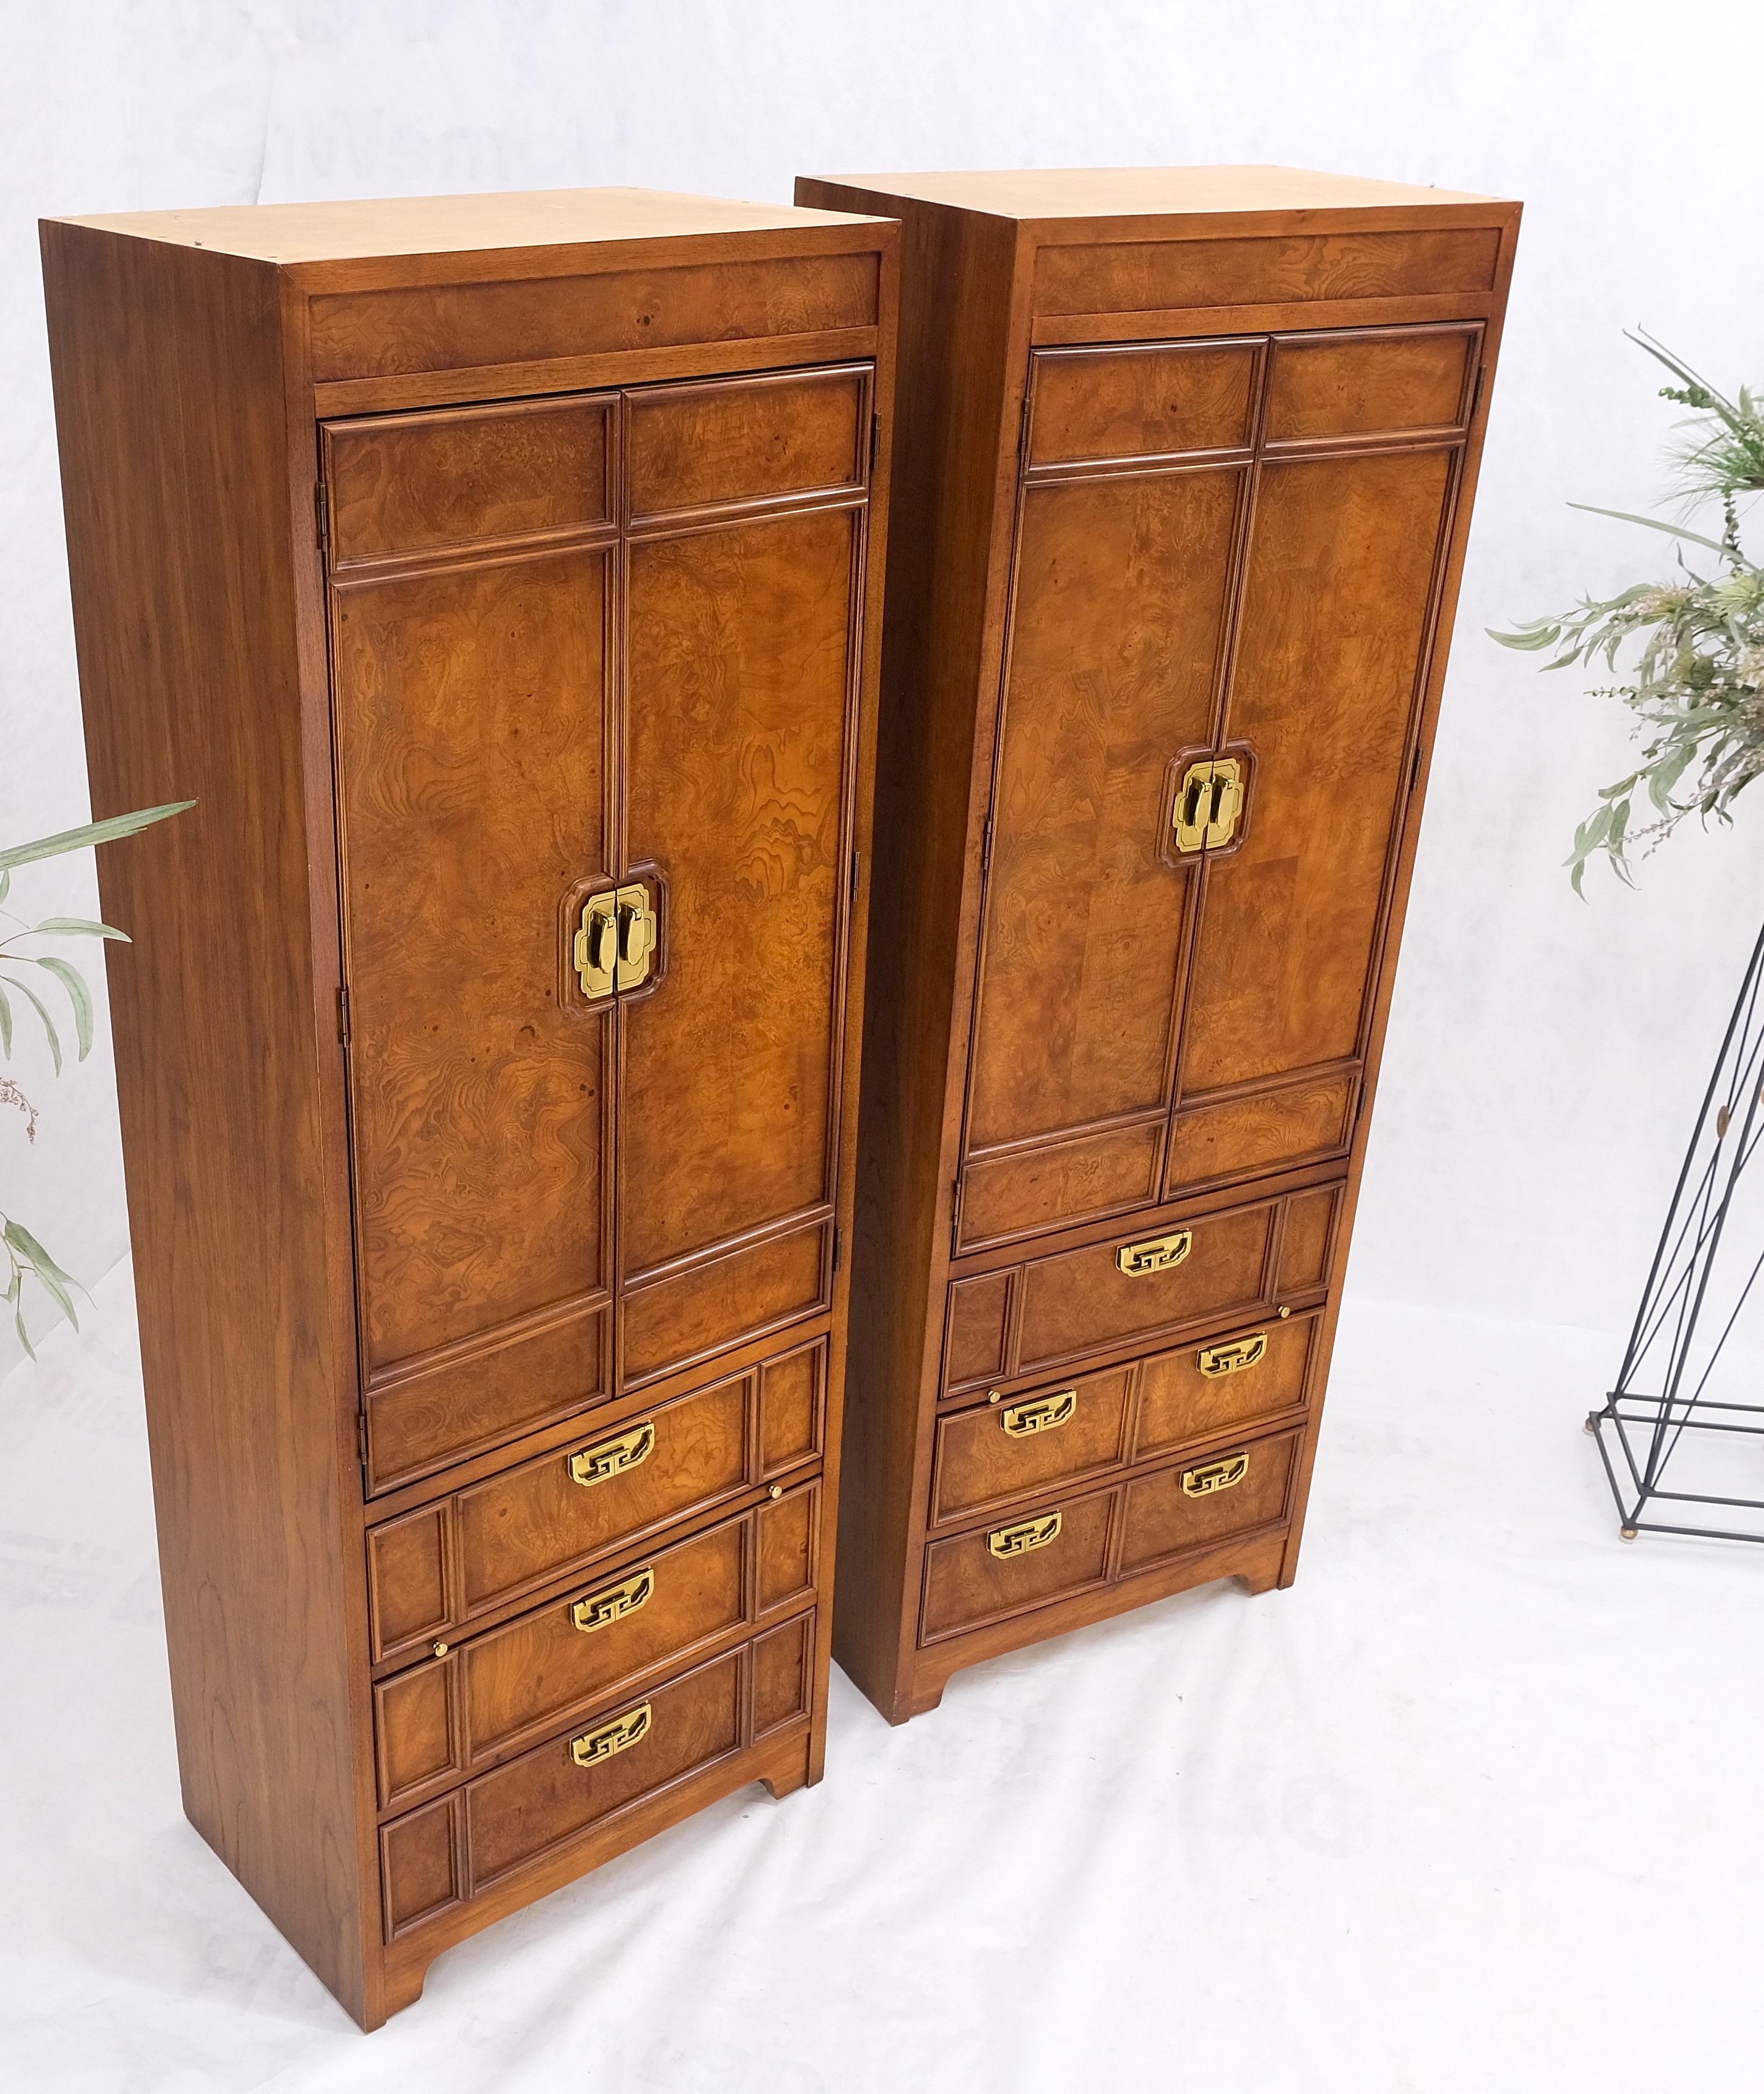 Thomasville Tall Tower Shape Highboy Dressers W/ Drawer Compartment Burl Wood  1